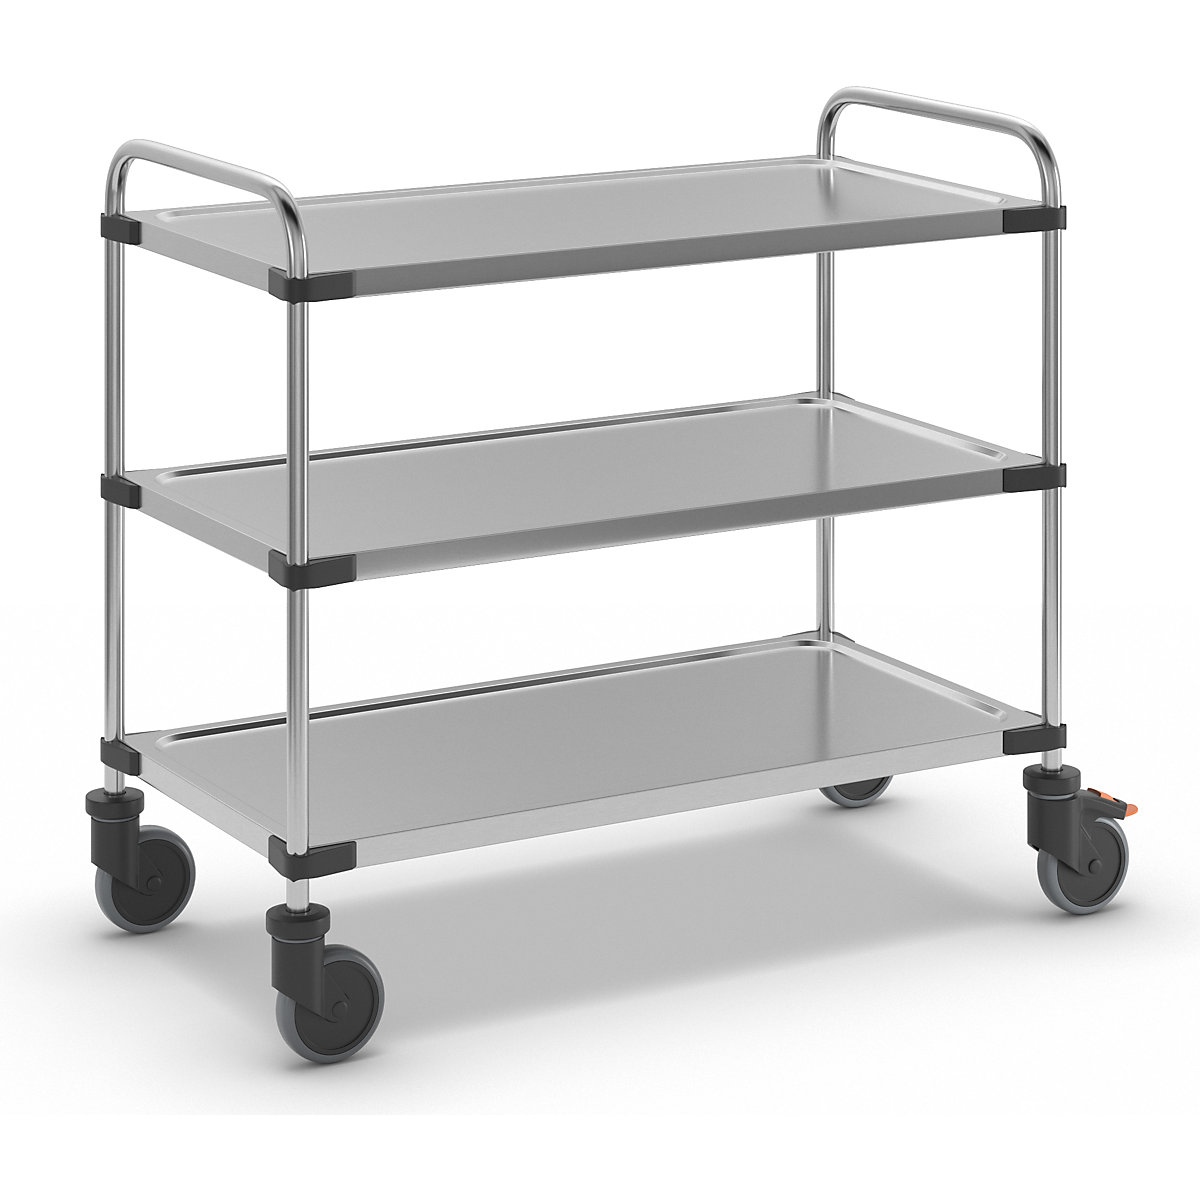 Stainless steel table trolley, with 3 shelves, LxWxH 1070 x 570 x 950 mm, unassembled-3